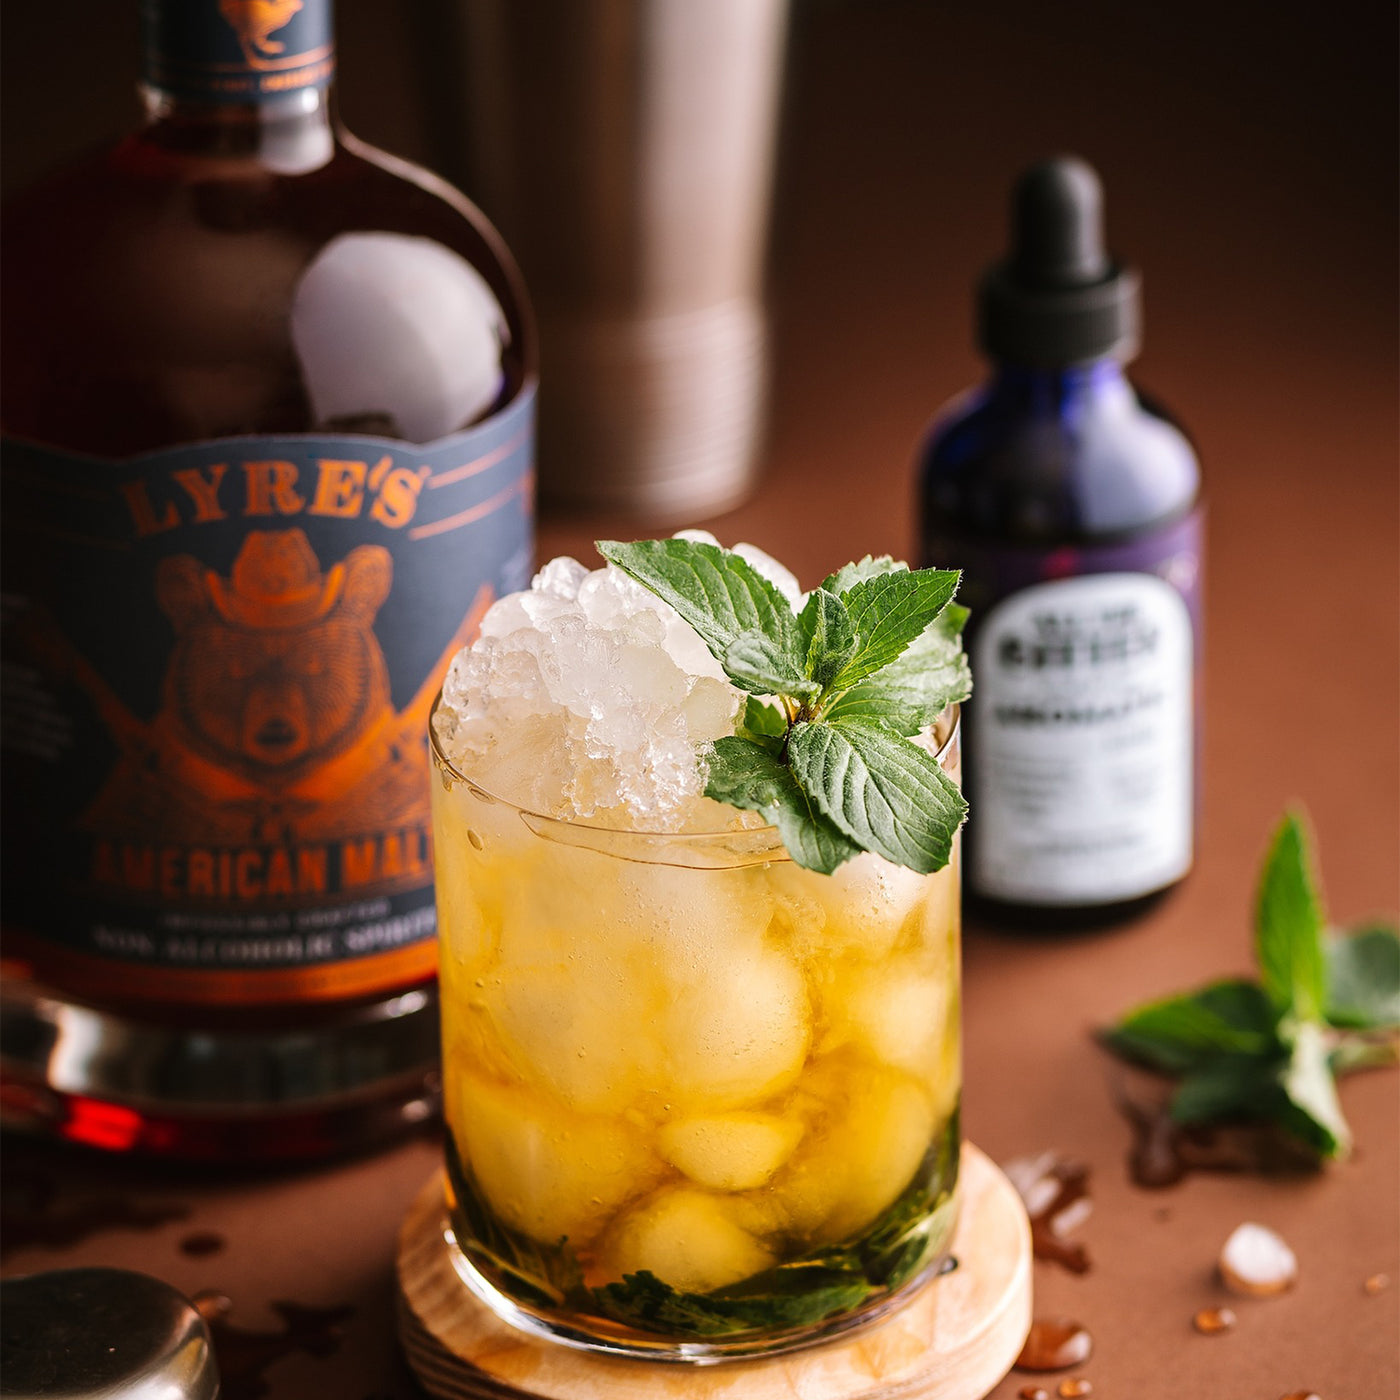 Lyre's non-alcoholic whiskey cocktail